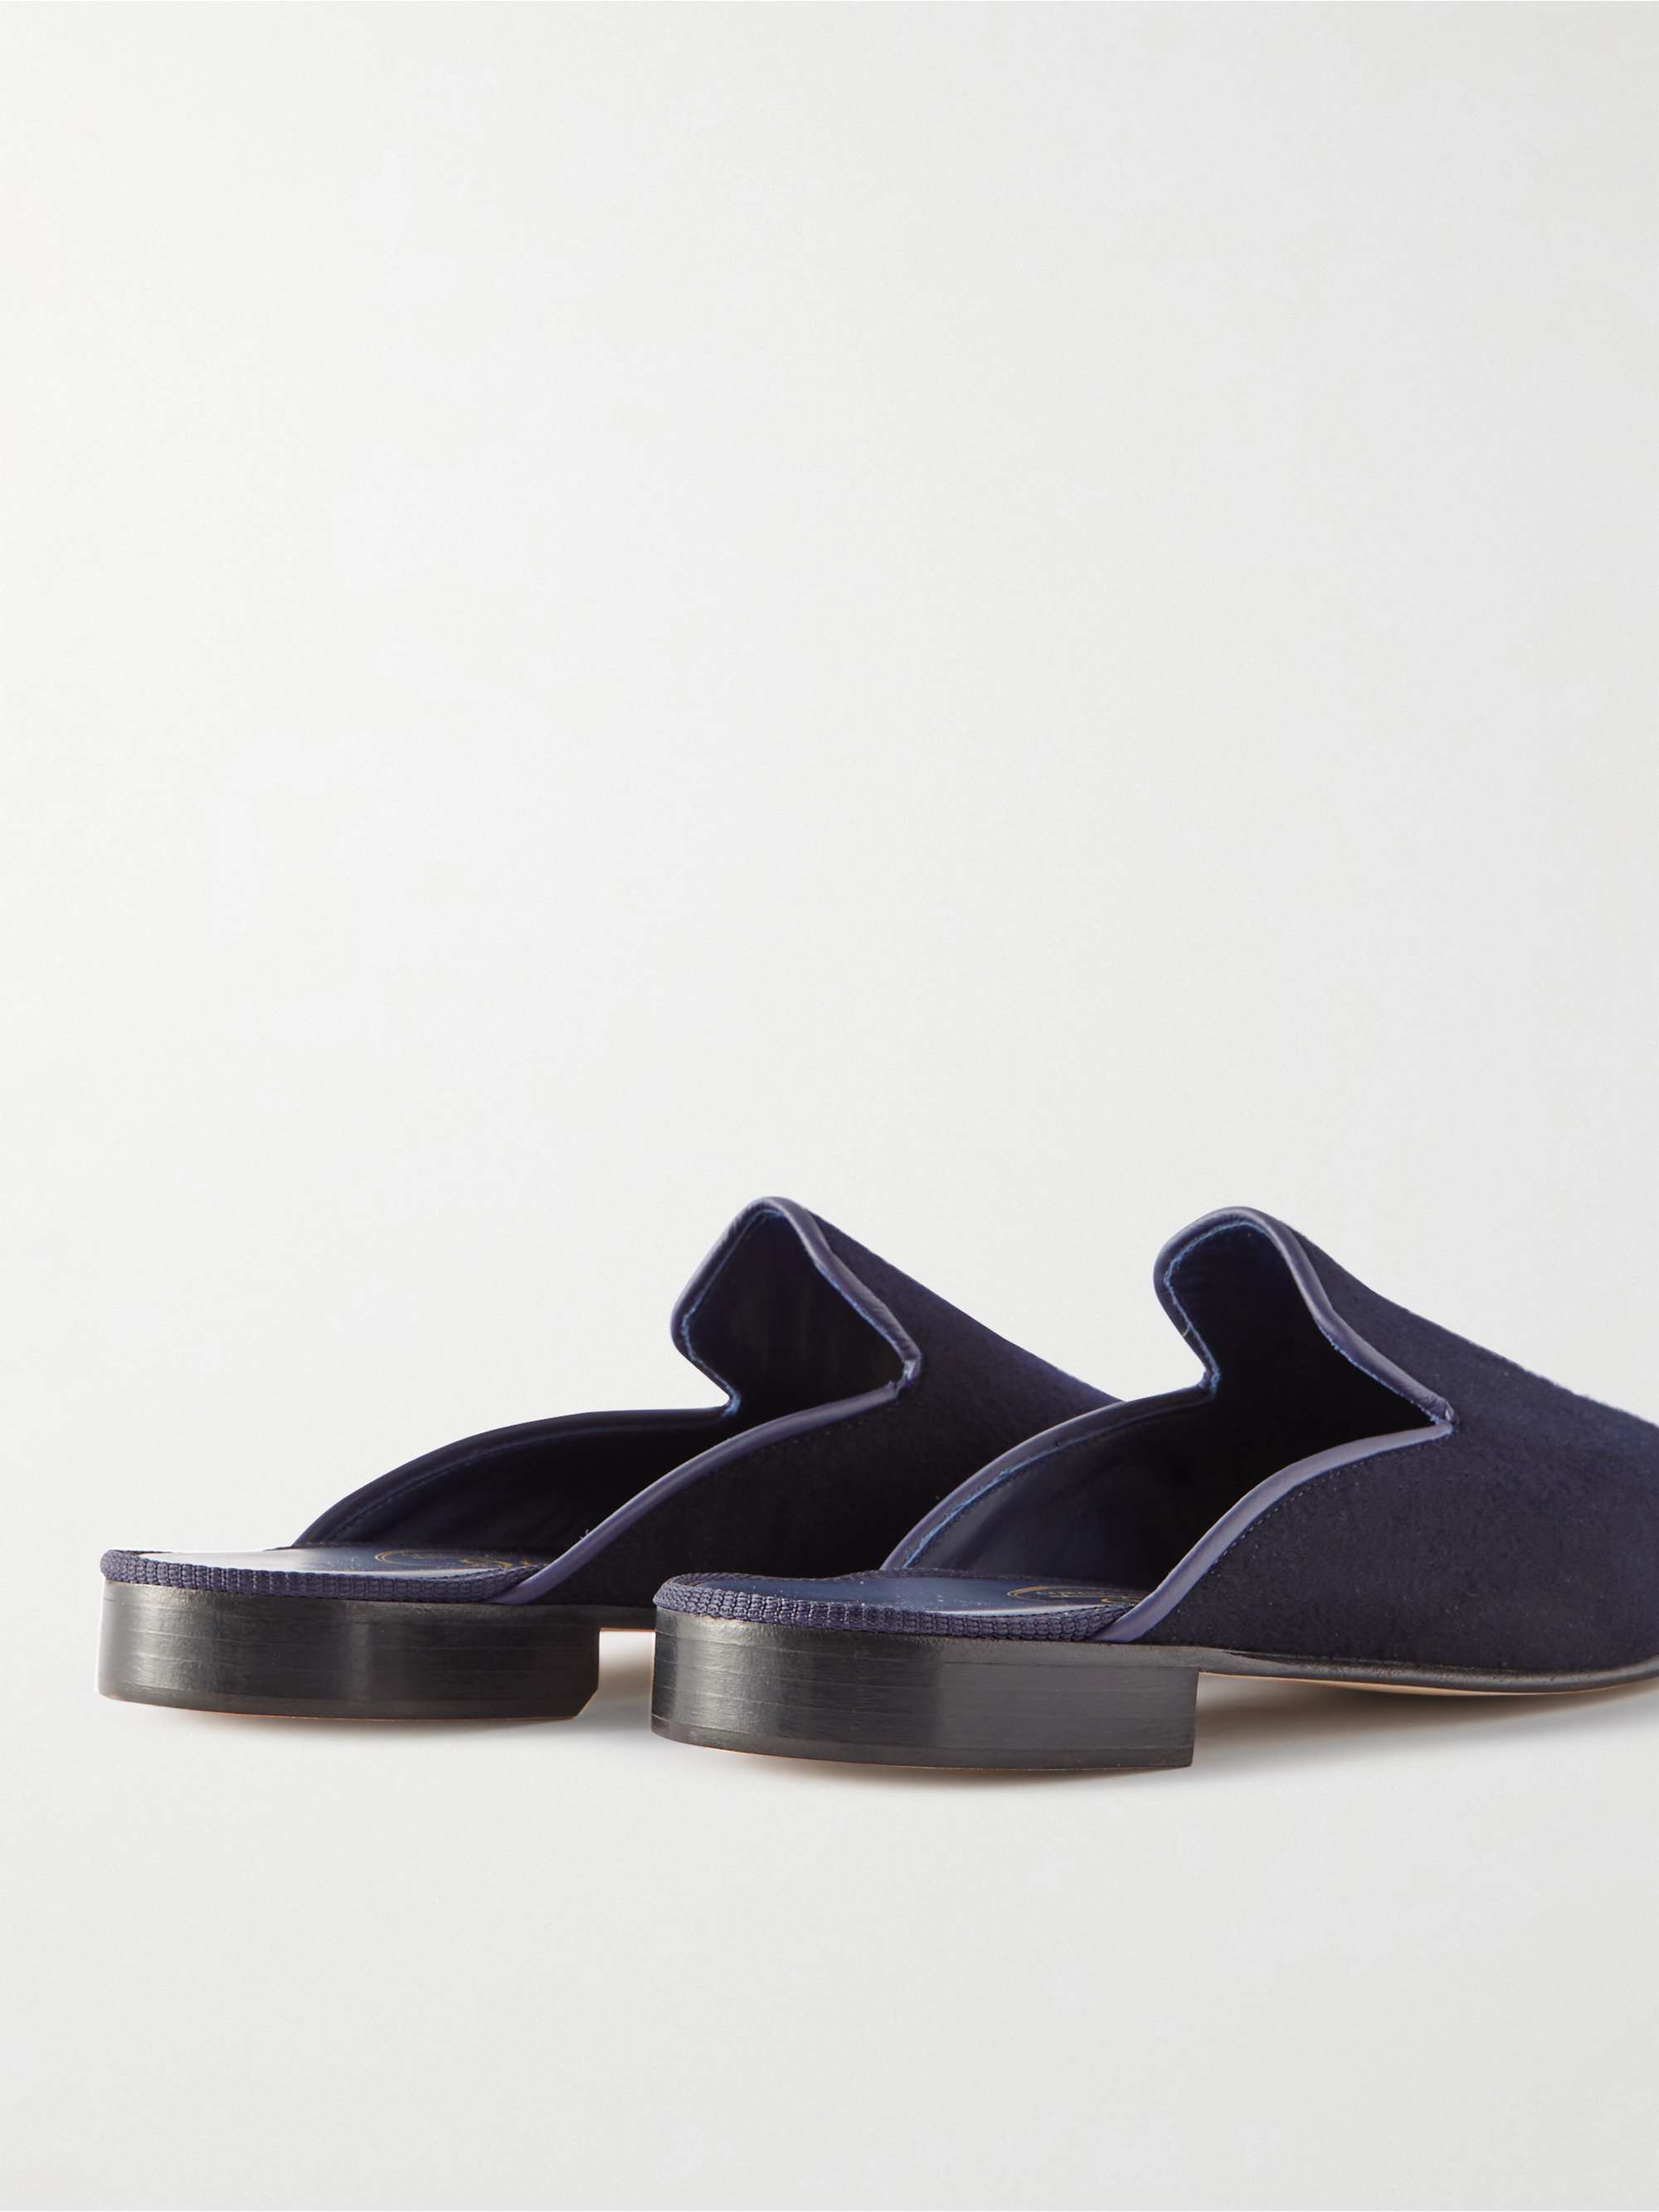 GEORGE CLEVERLEY Leather-Trimmed Cashmere Backless Loafers